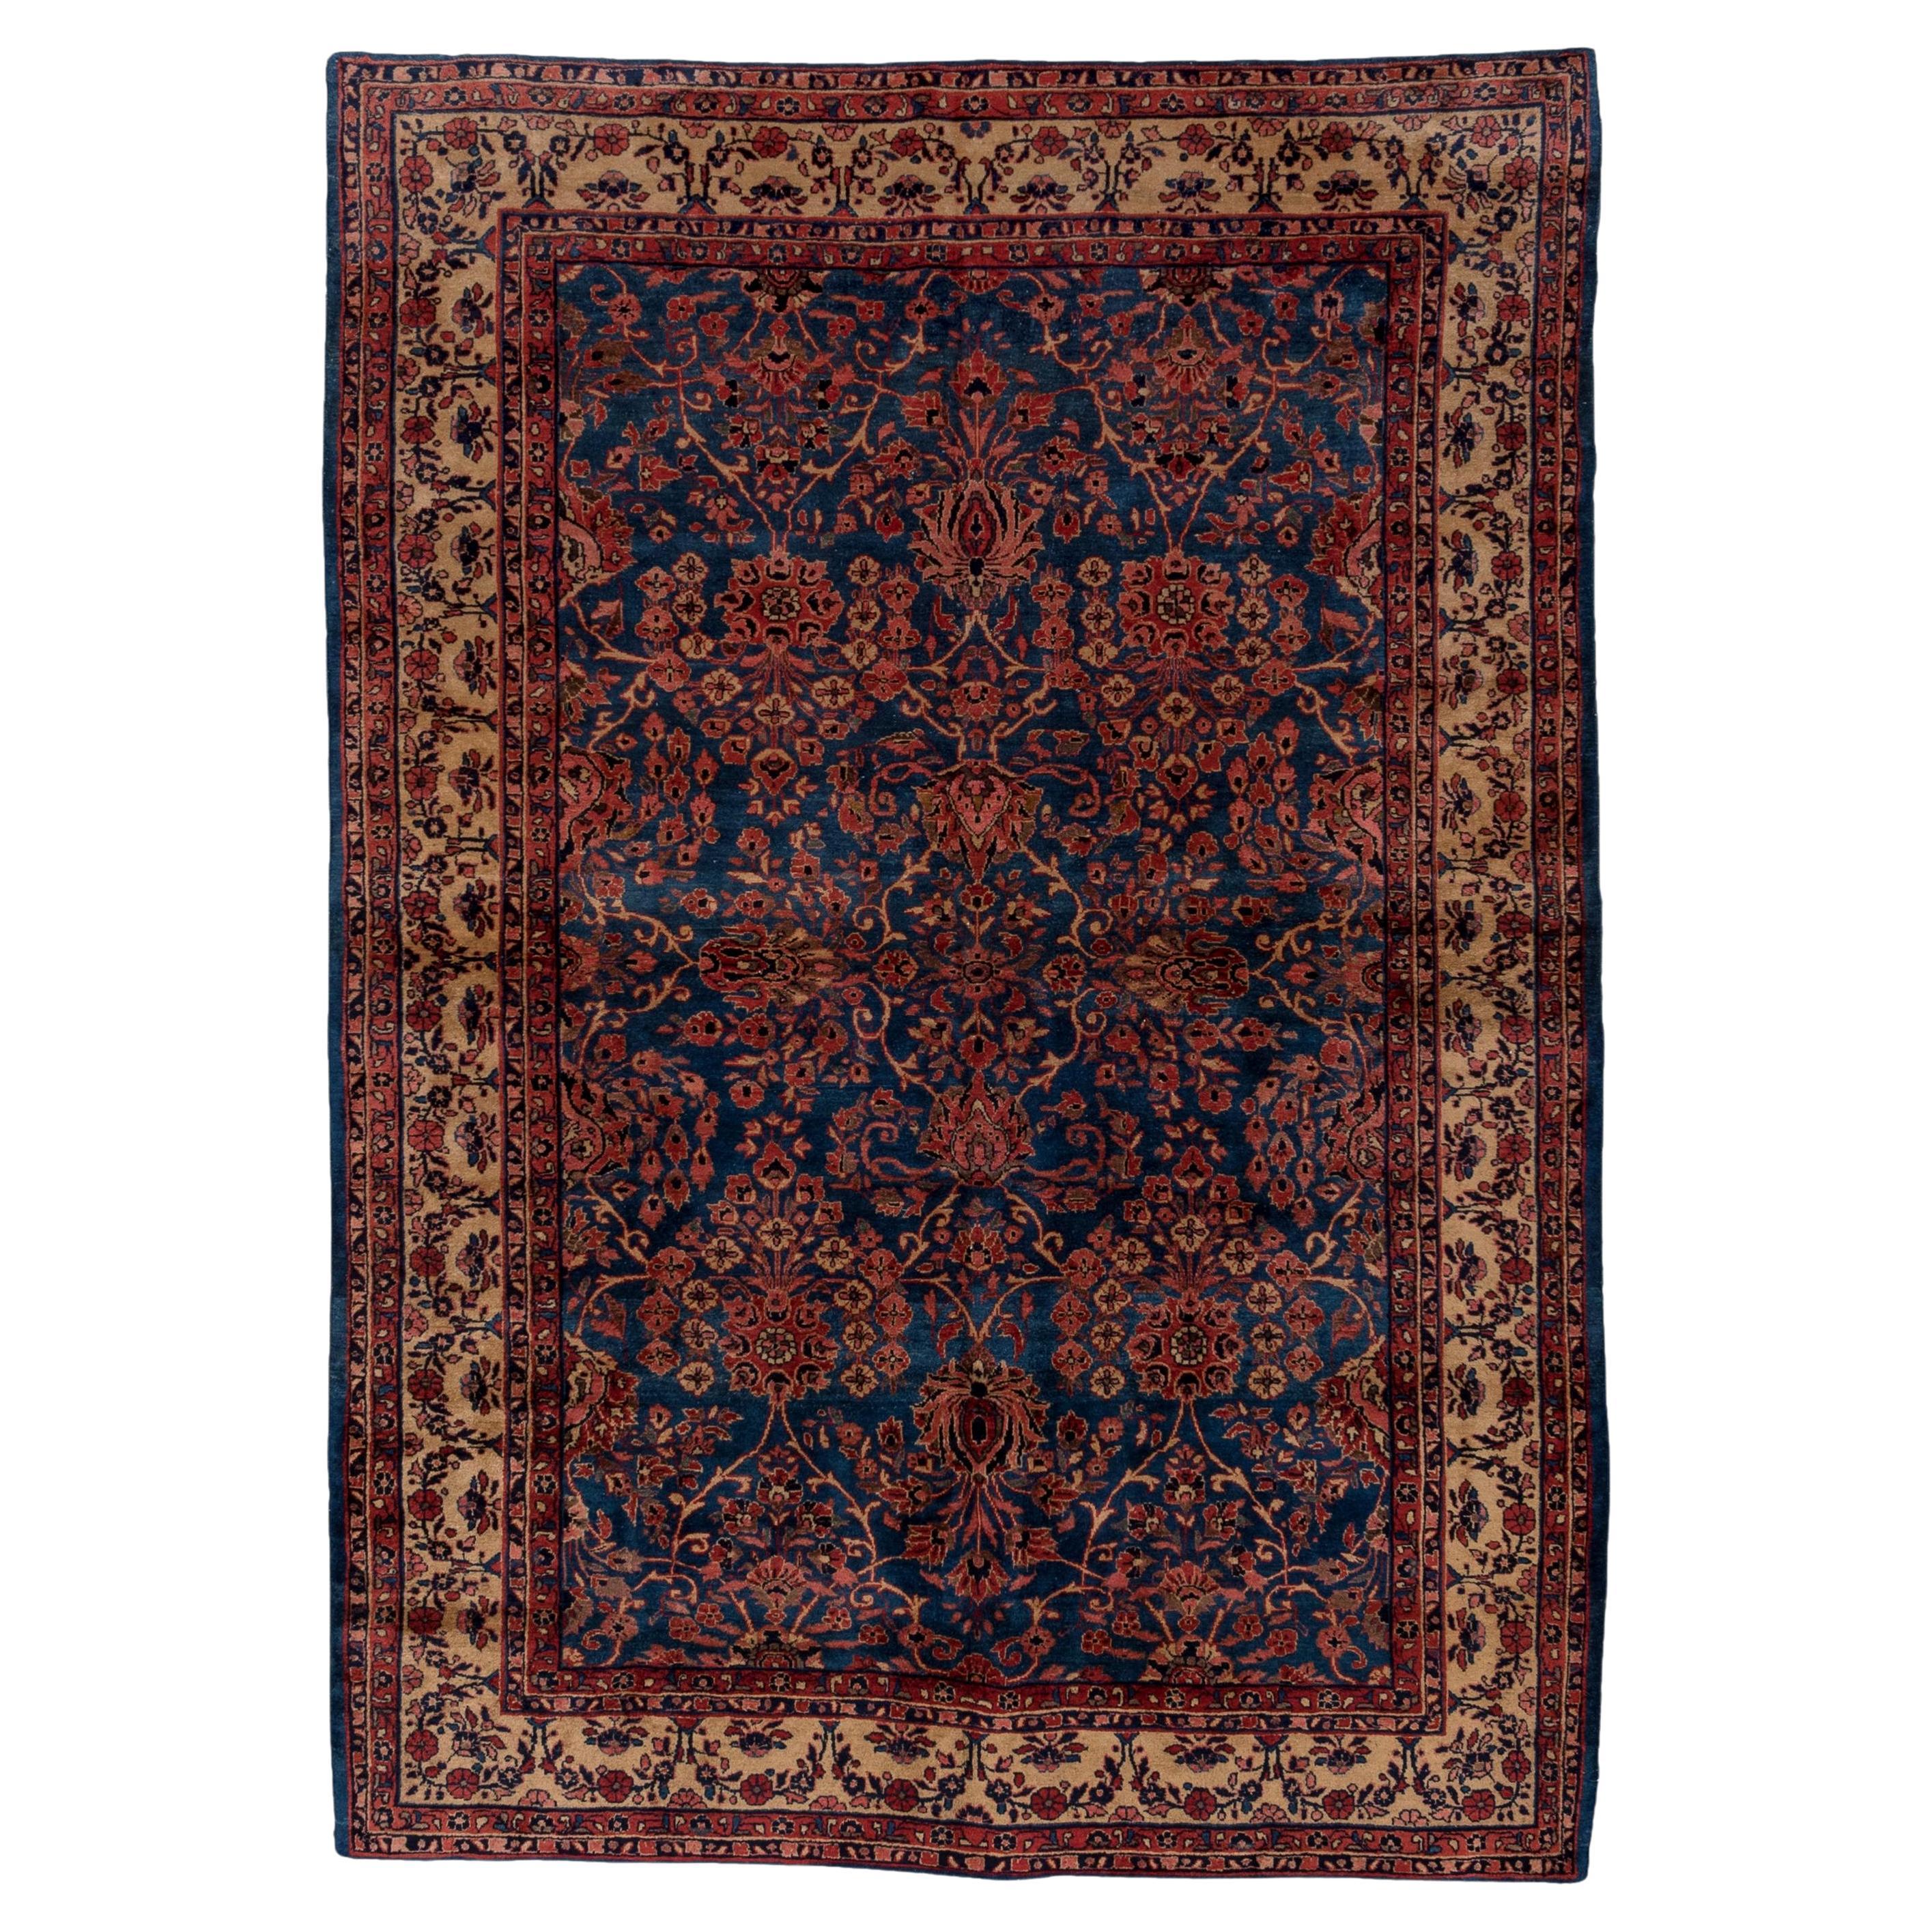 Antique Persian Sarouk Carpet, Royal Blue All-Over Field, Shiny Beige Borders